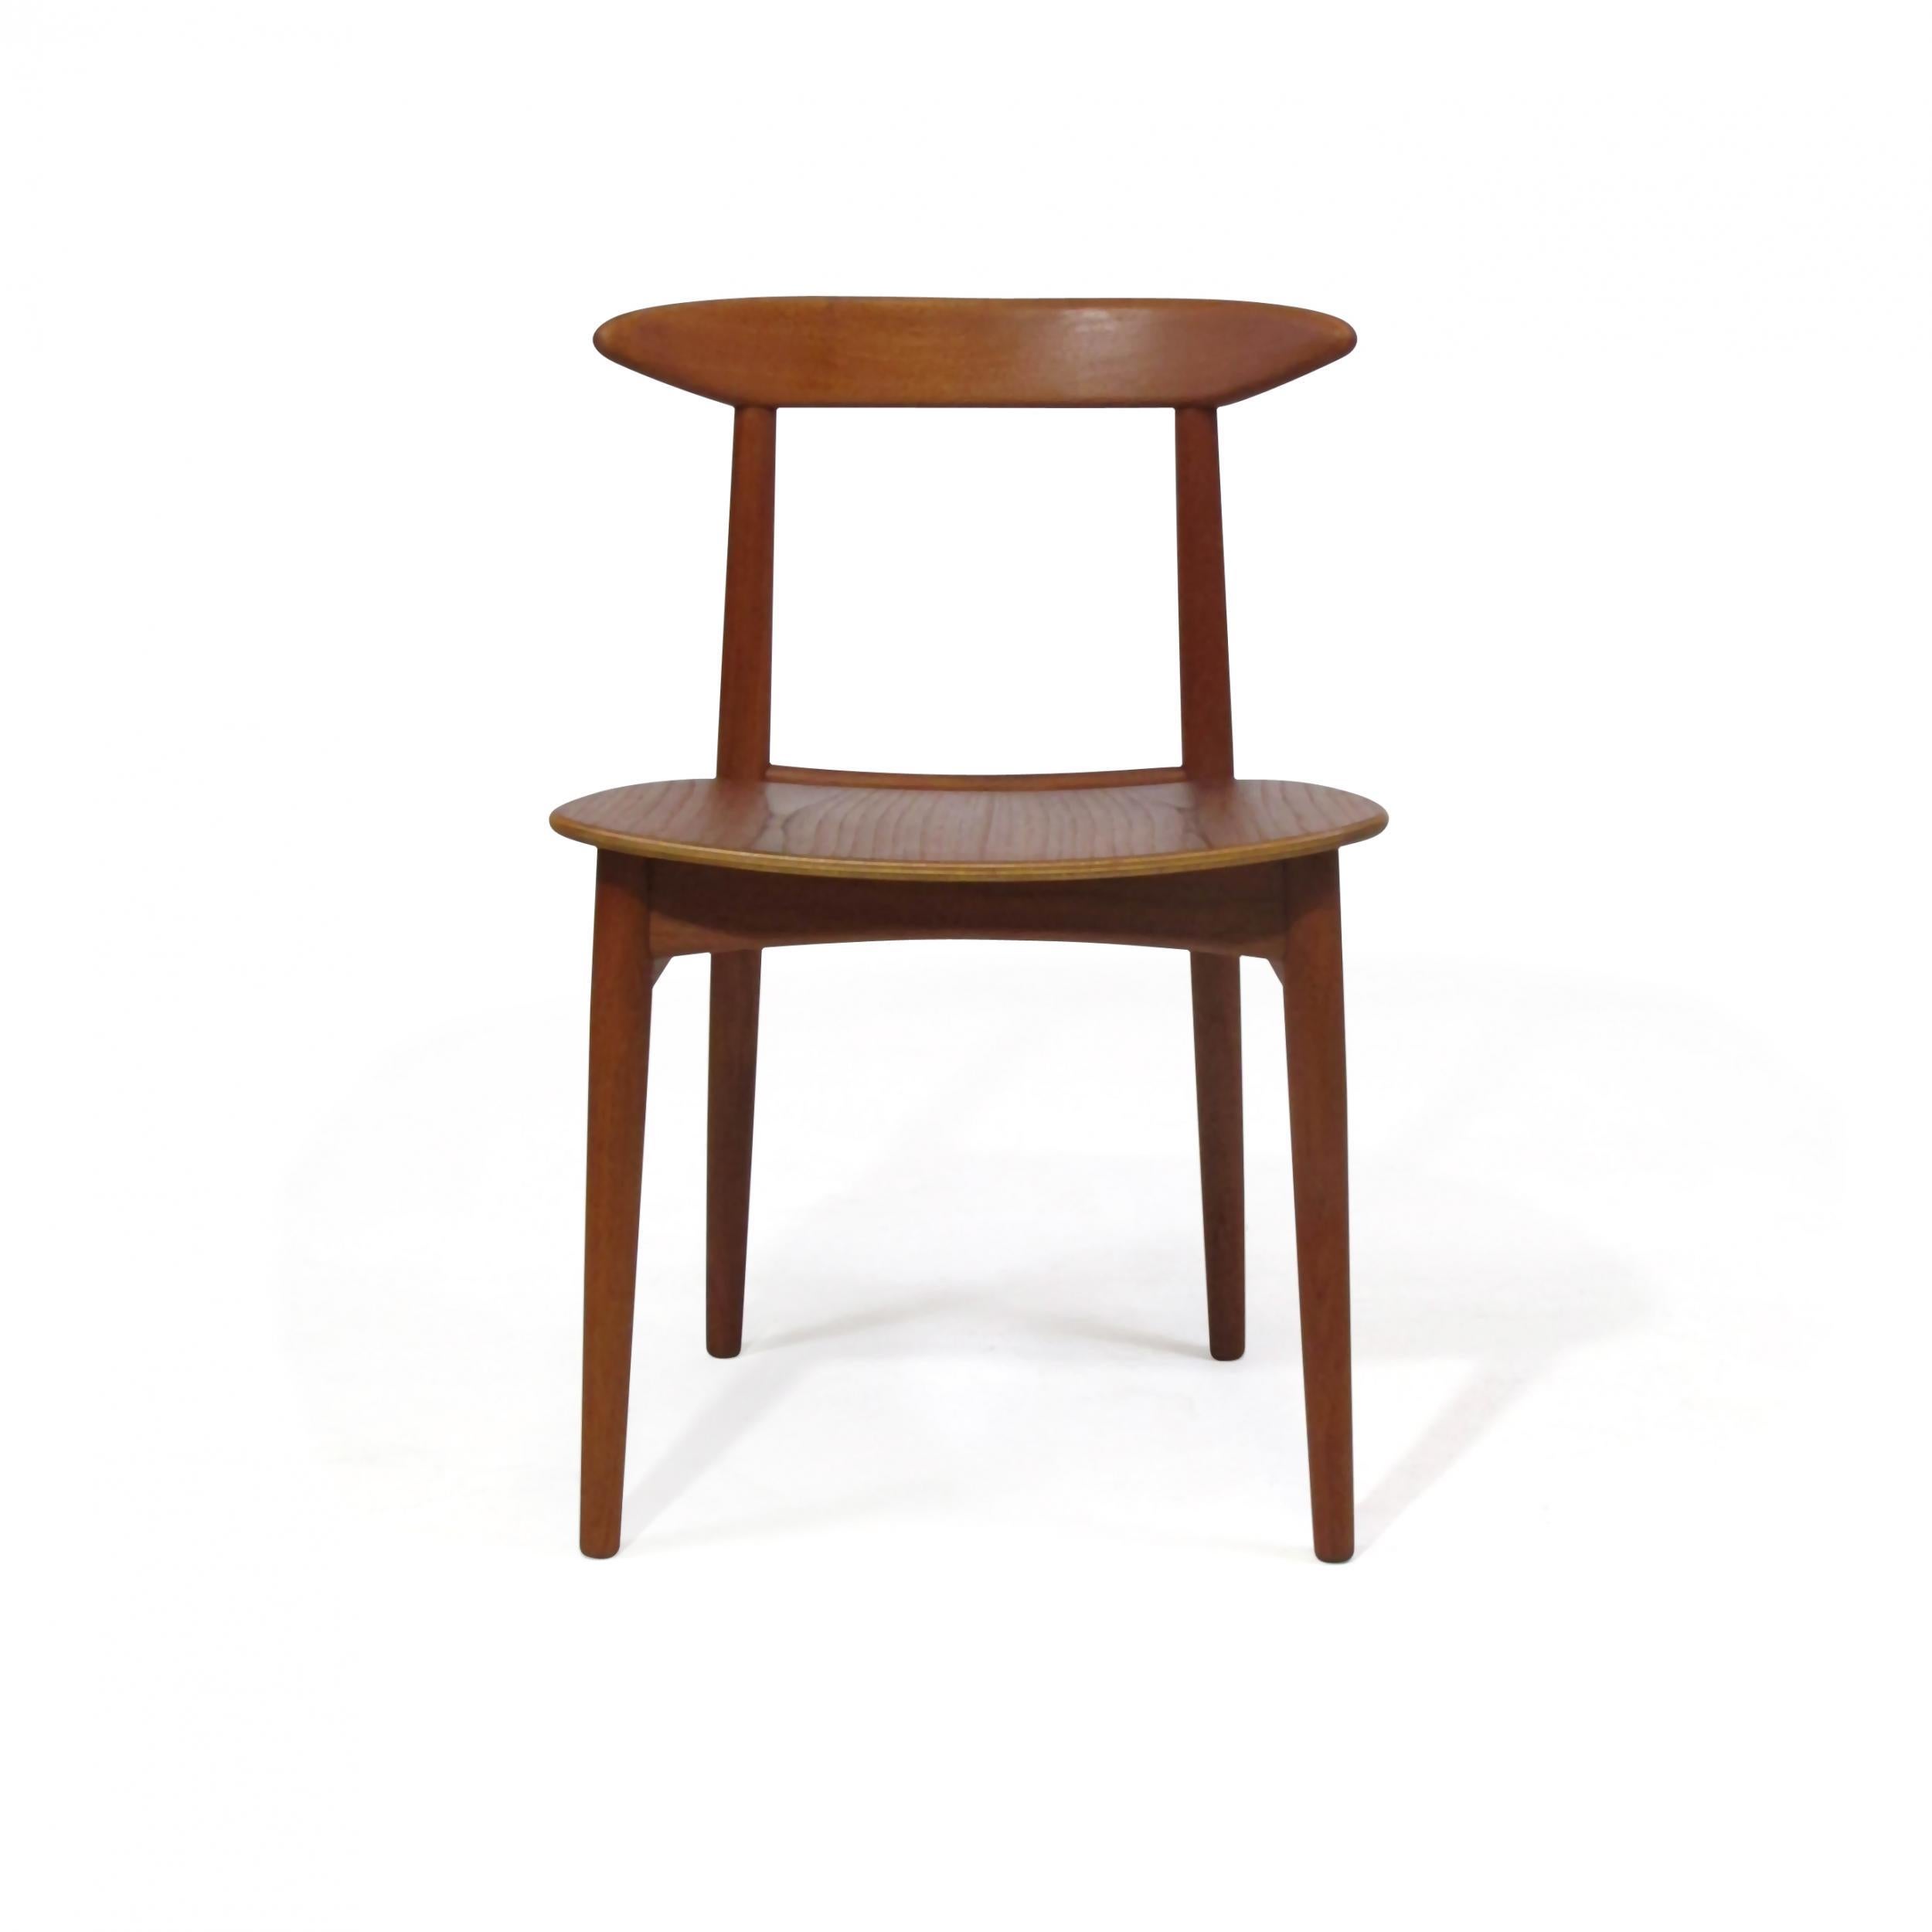 Scandinavian Modern Danish Teak Dining Chairs with Wooden Seats For Sale